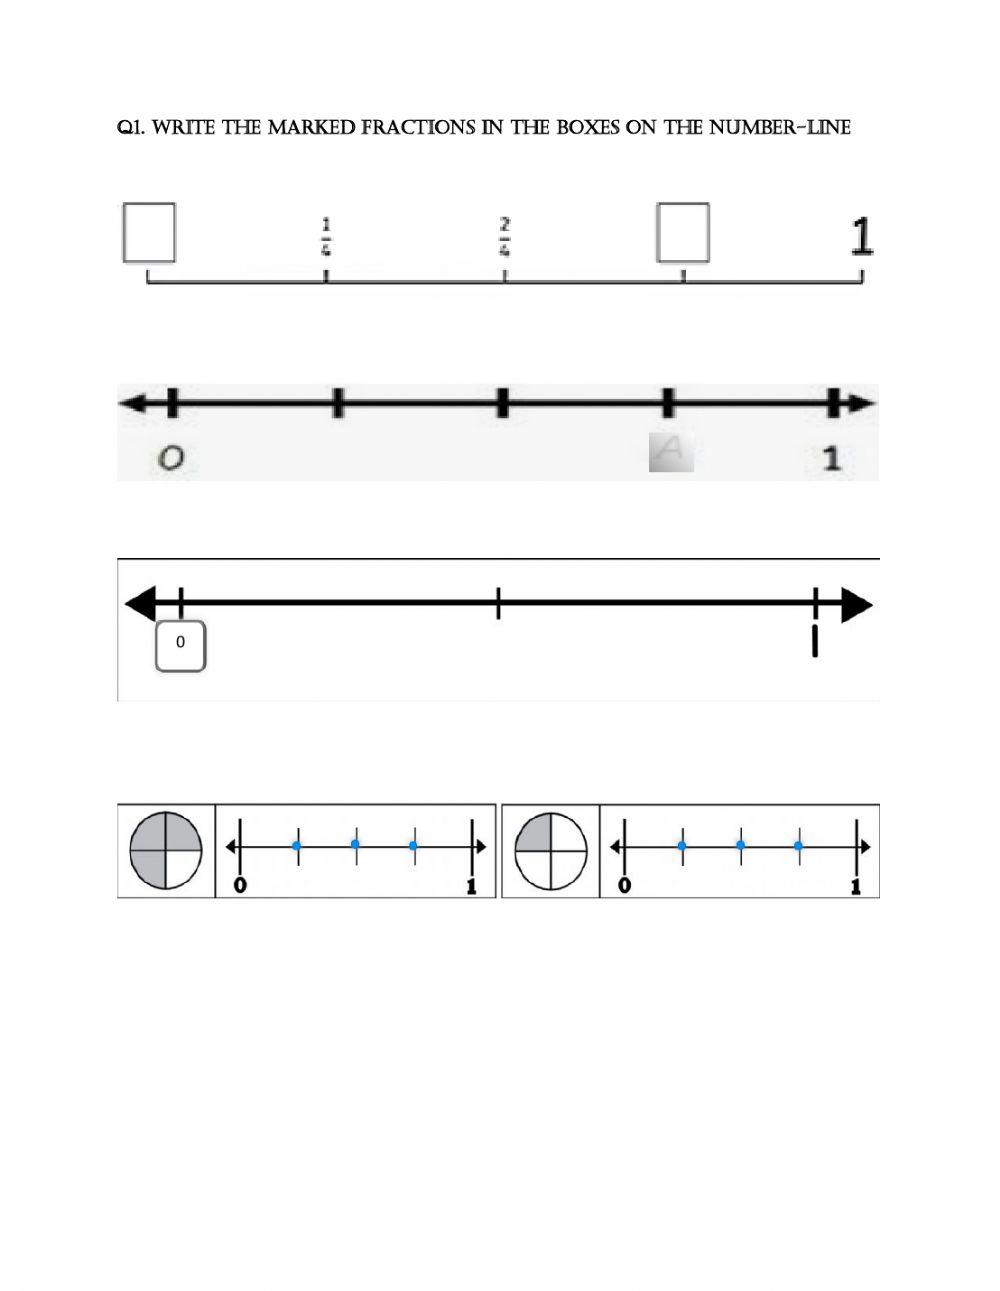 Ordering Fractions on a Number line